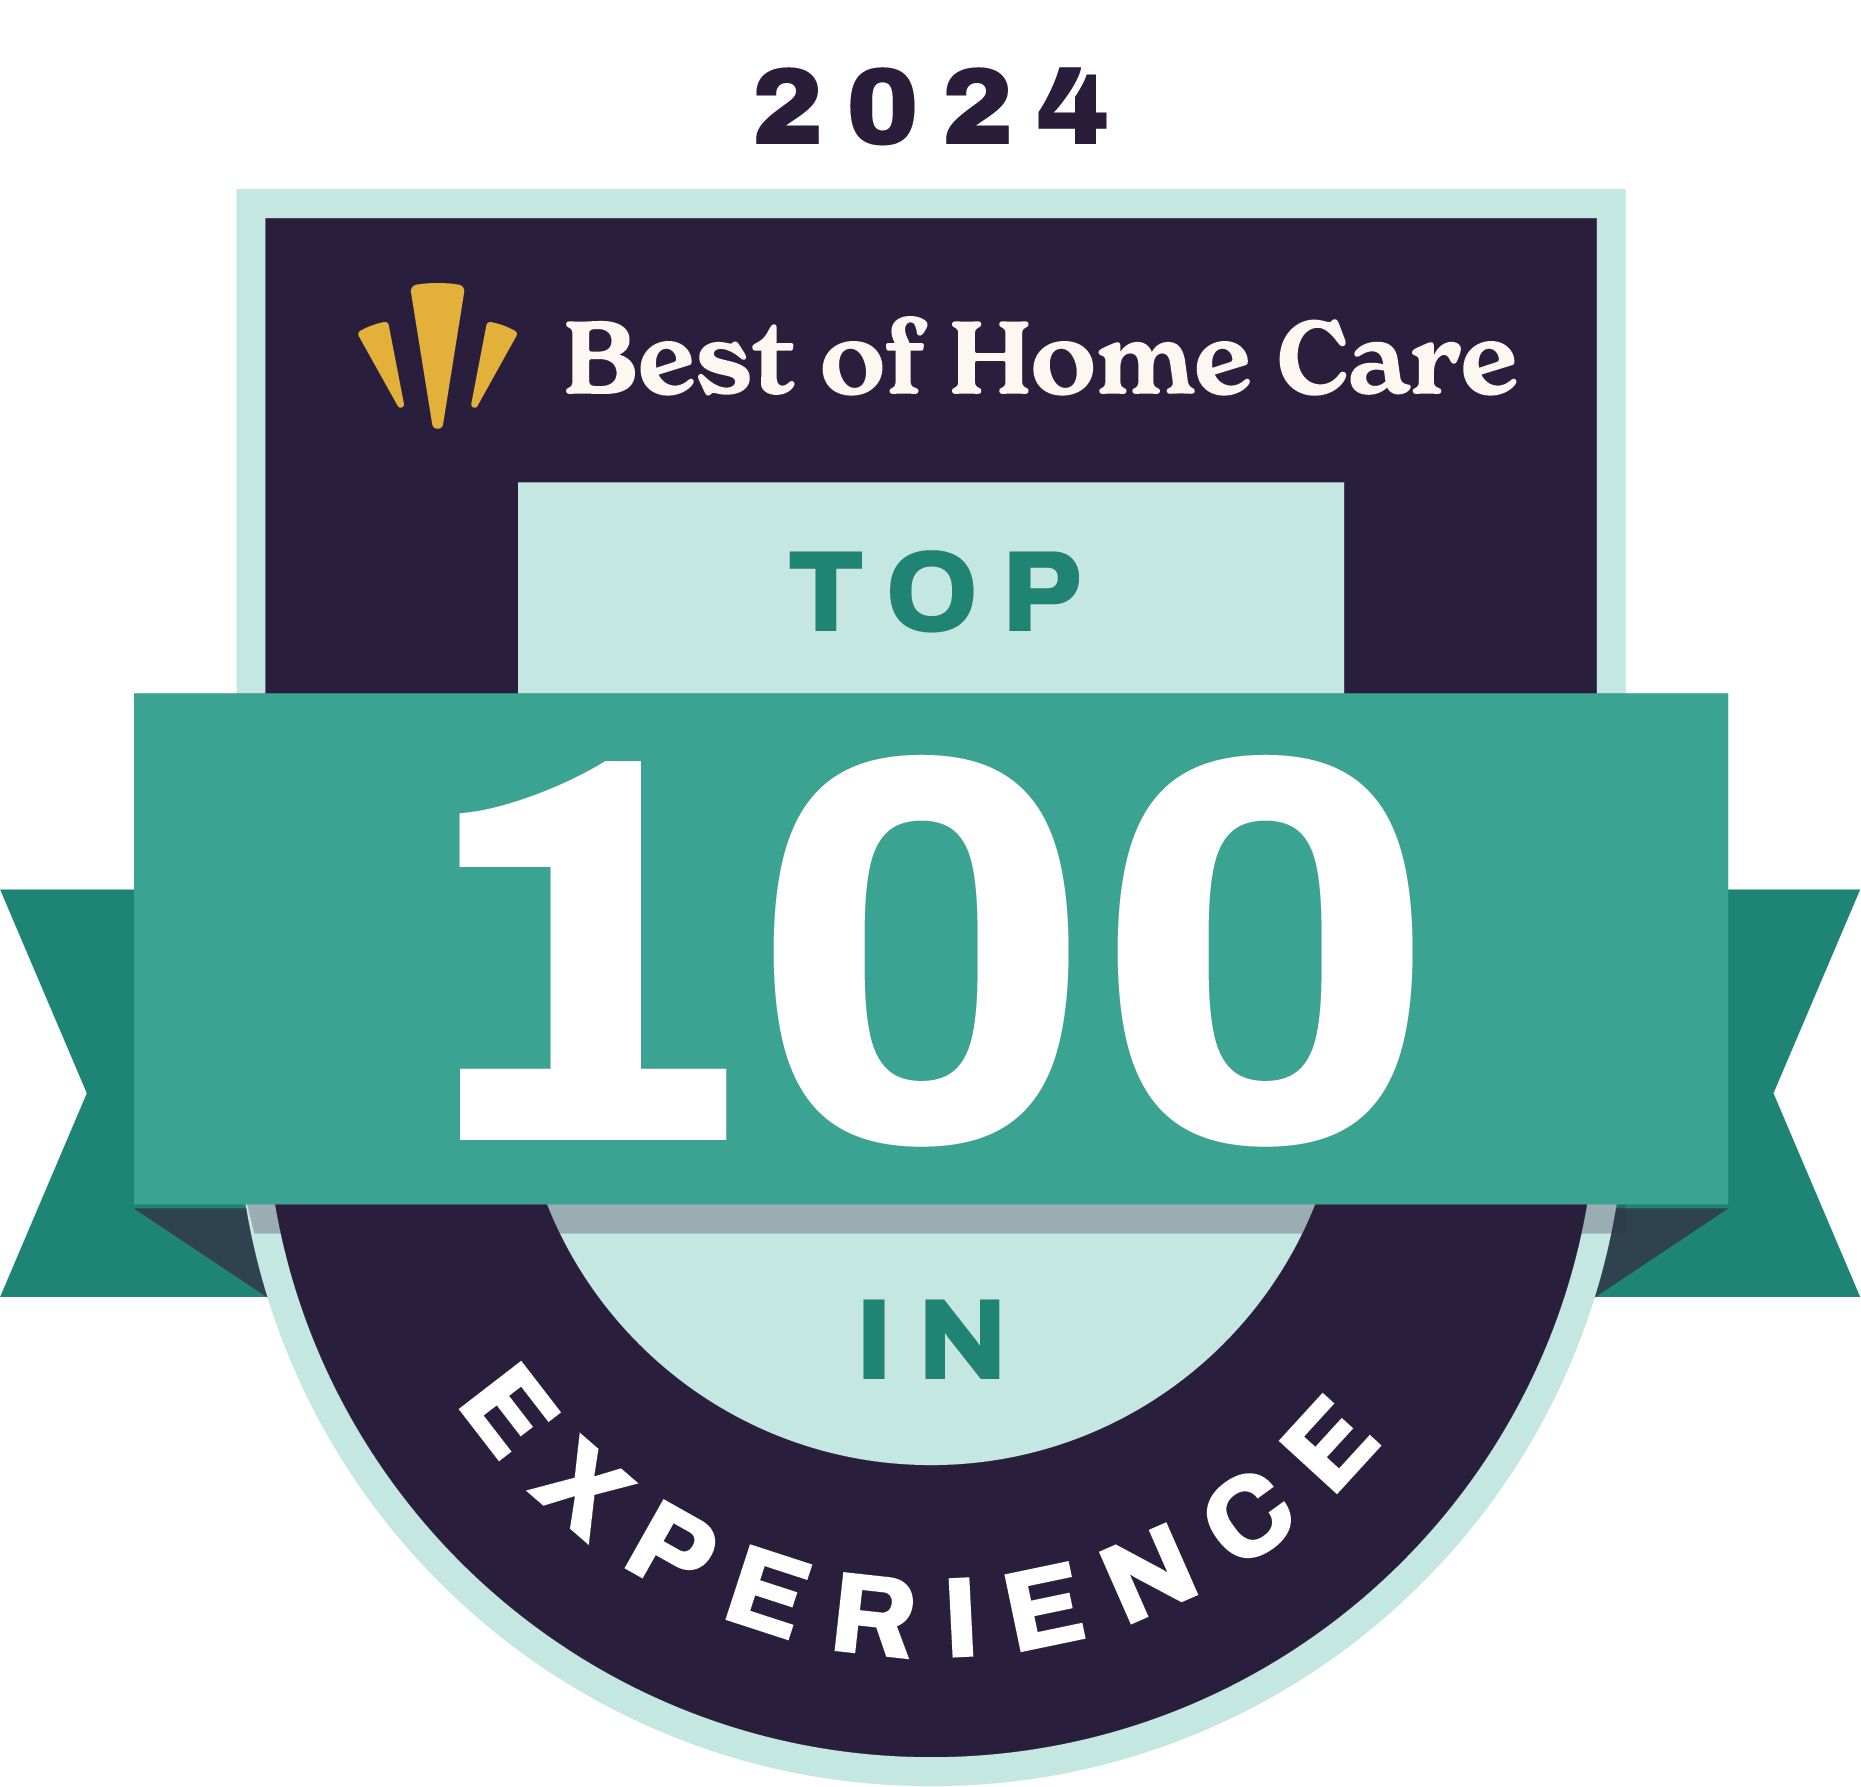 Top 100 in Experience 2024 logo